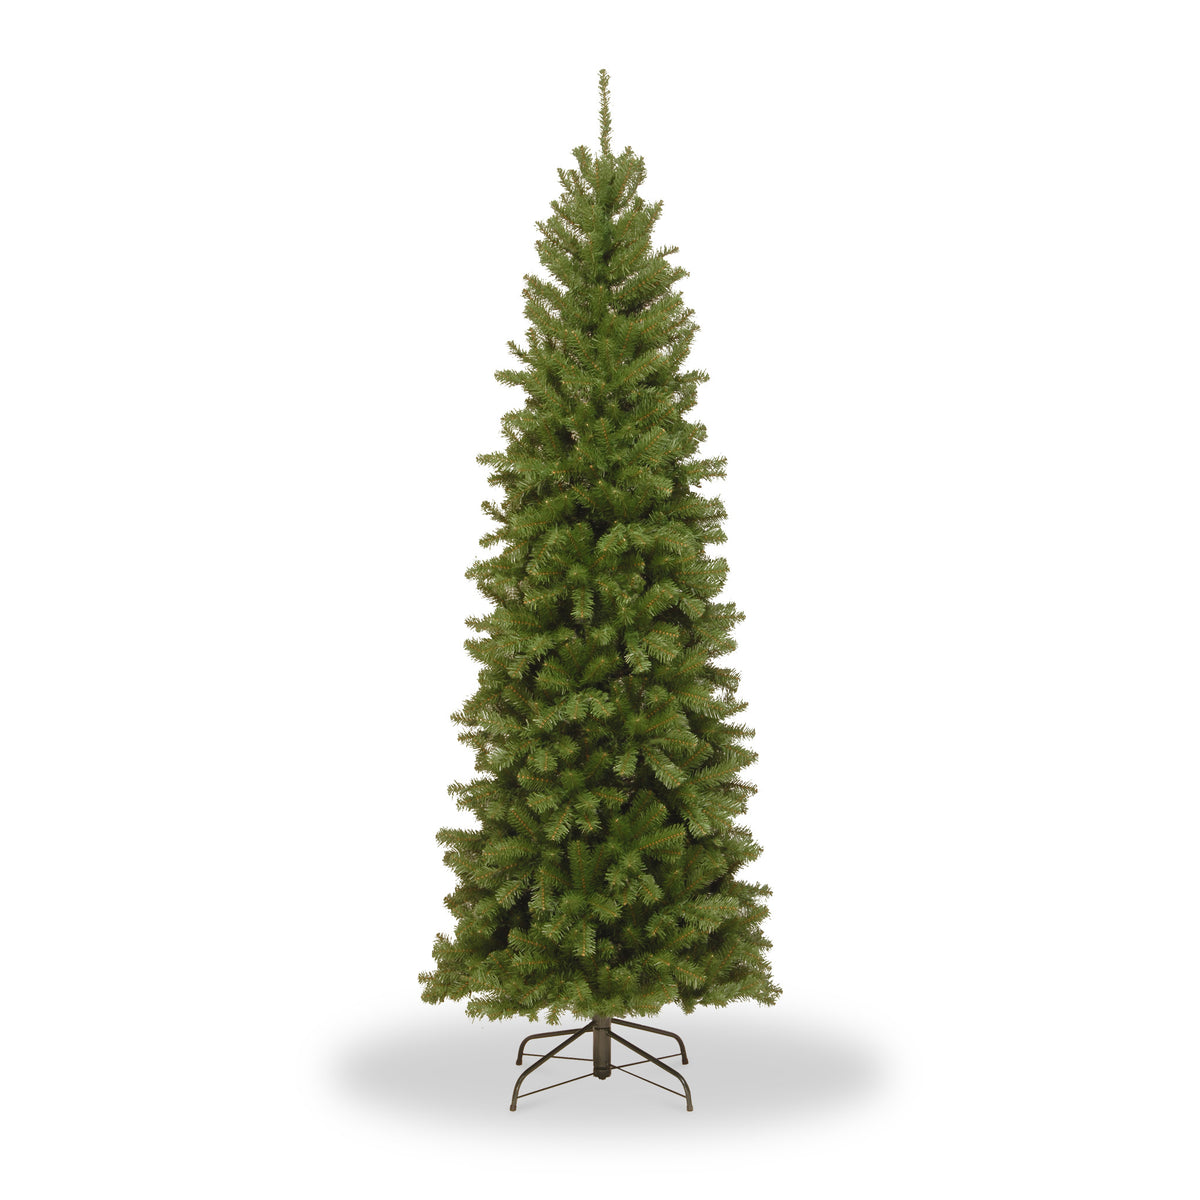 North Valley Spruce 7.5ft Pencil Slim Tree from Roseland